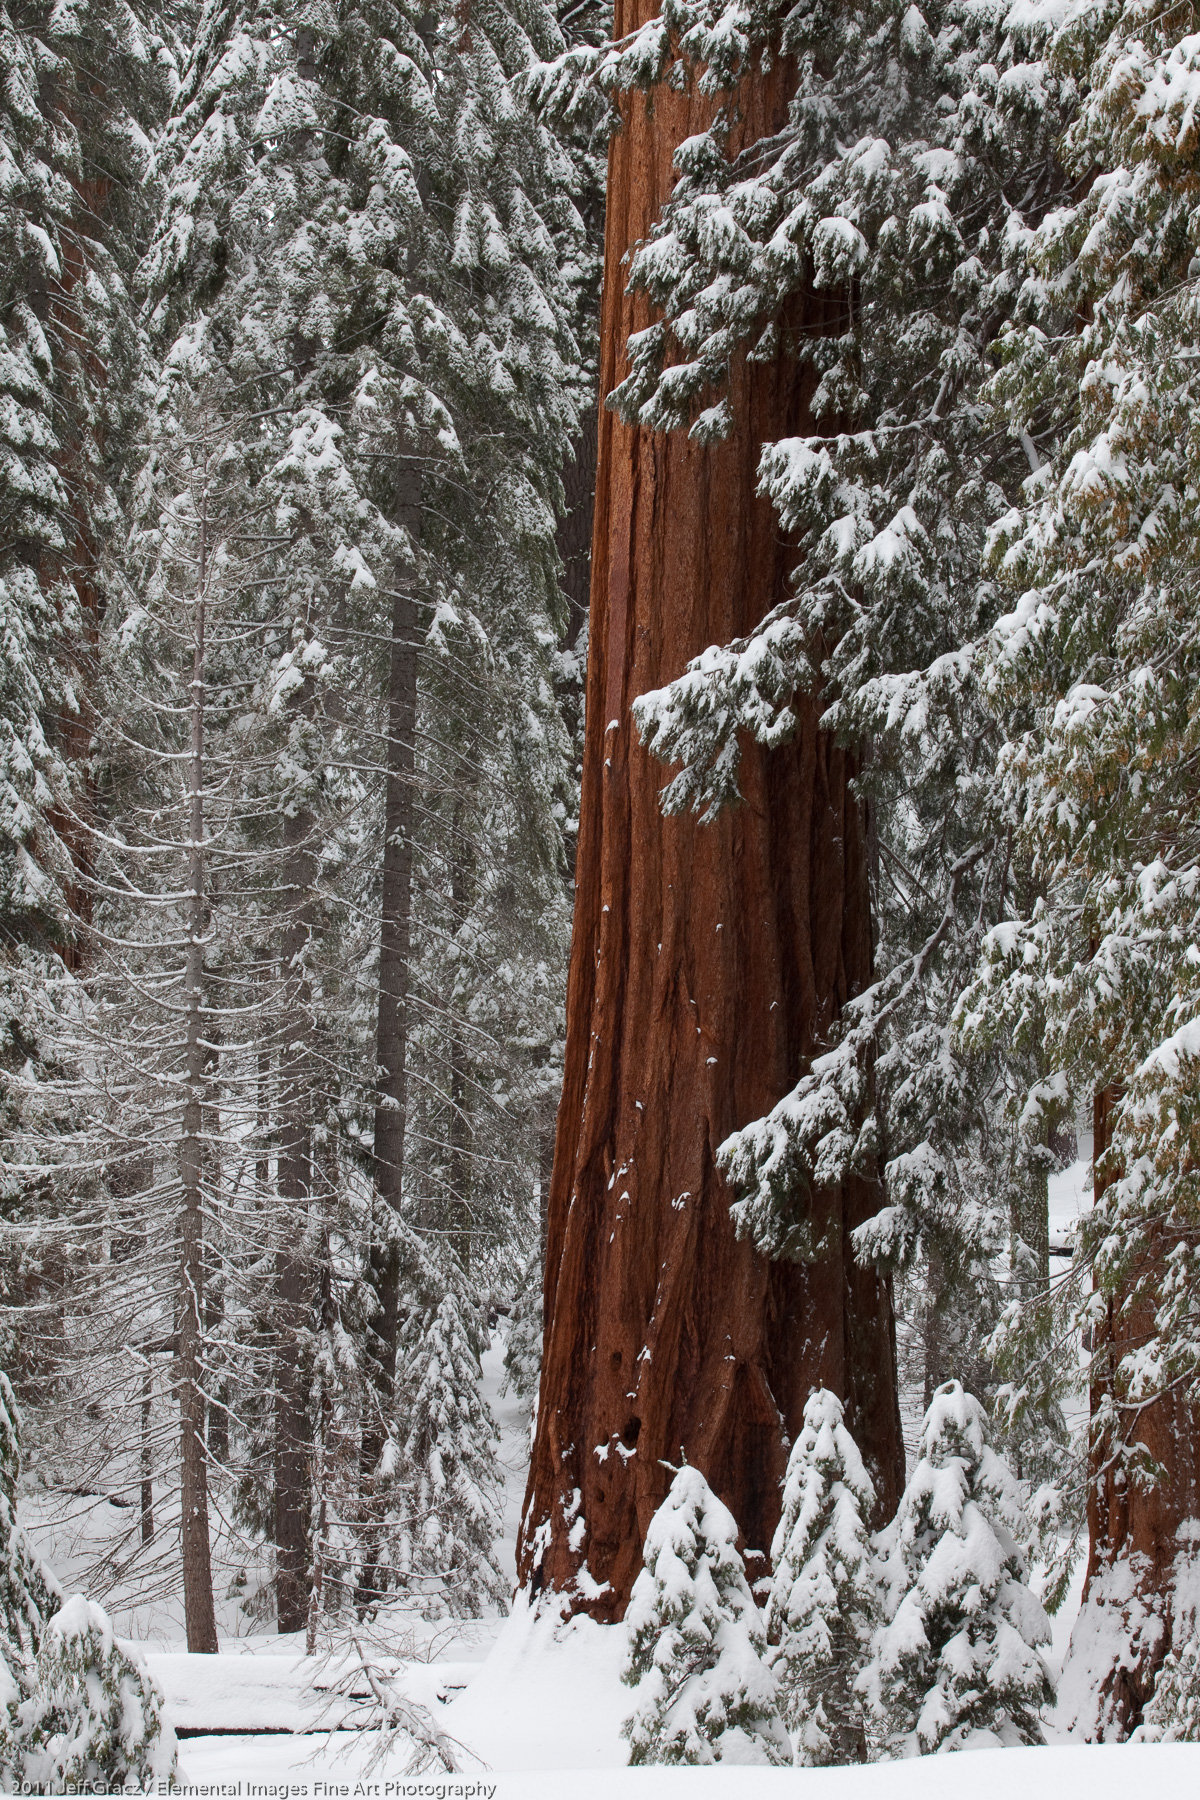 Sequoia Forest in Winter | Yosemite National Park | CA | USA - © 2011 Jeff Gracz / Elemental Images Fine Art Photography - All Rights Reserved Worldwide